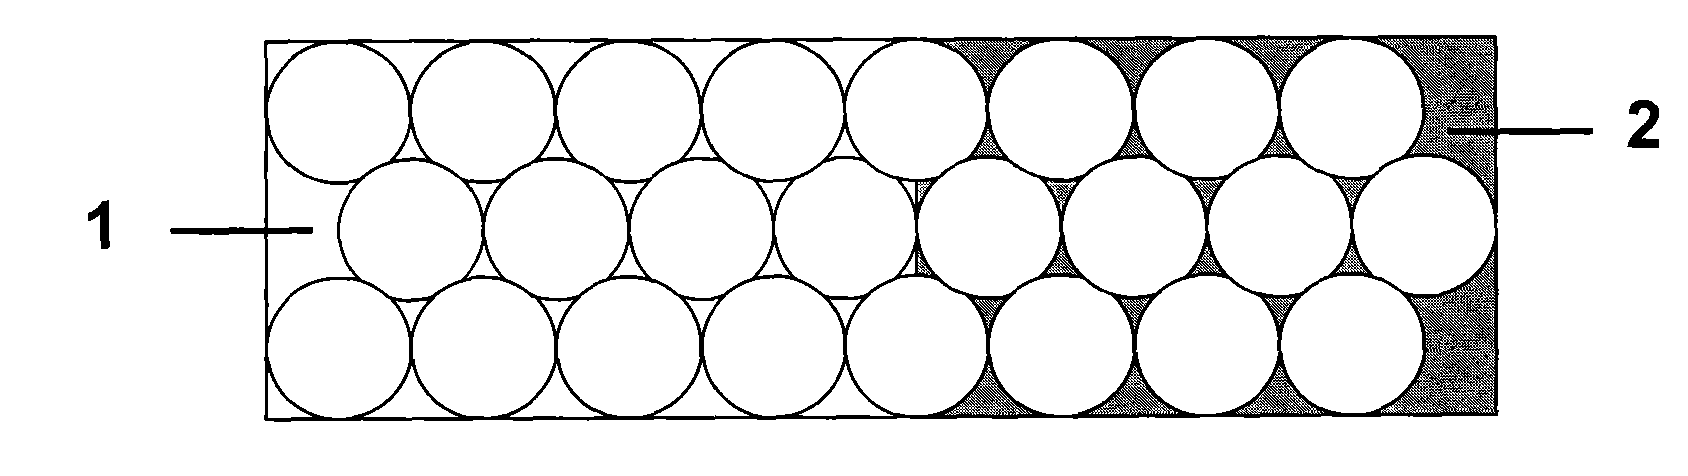 Preparation method of inverse opal hydrogel photonic crystal with hybridized structure